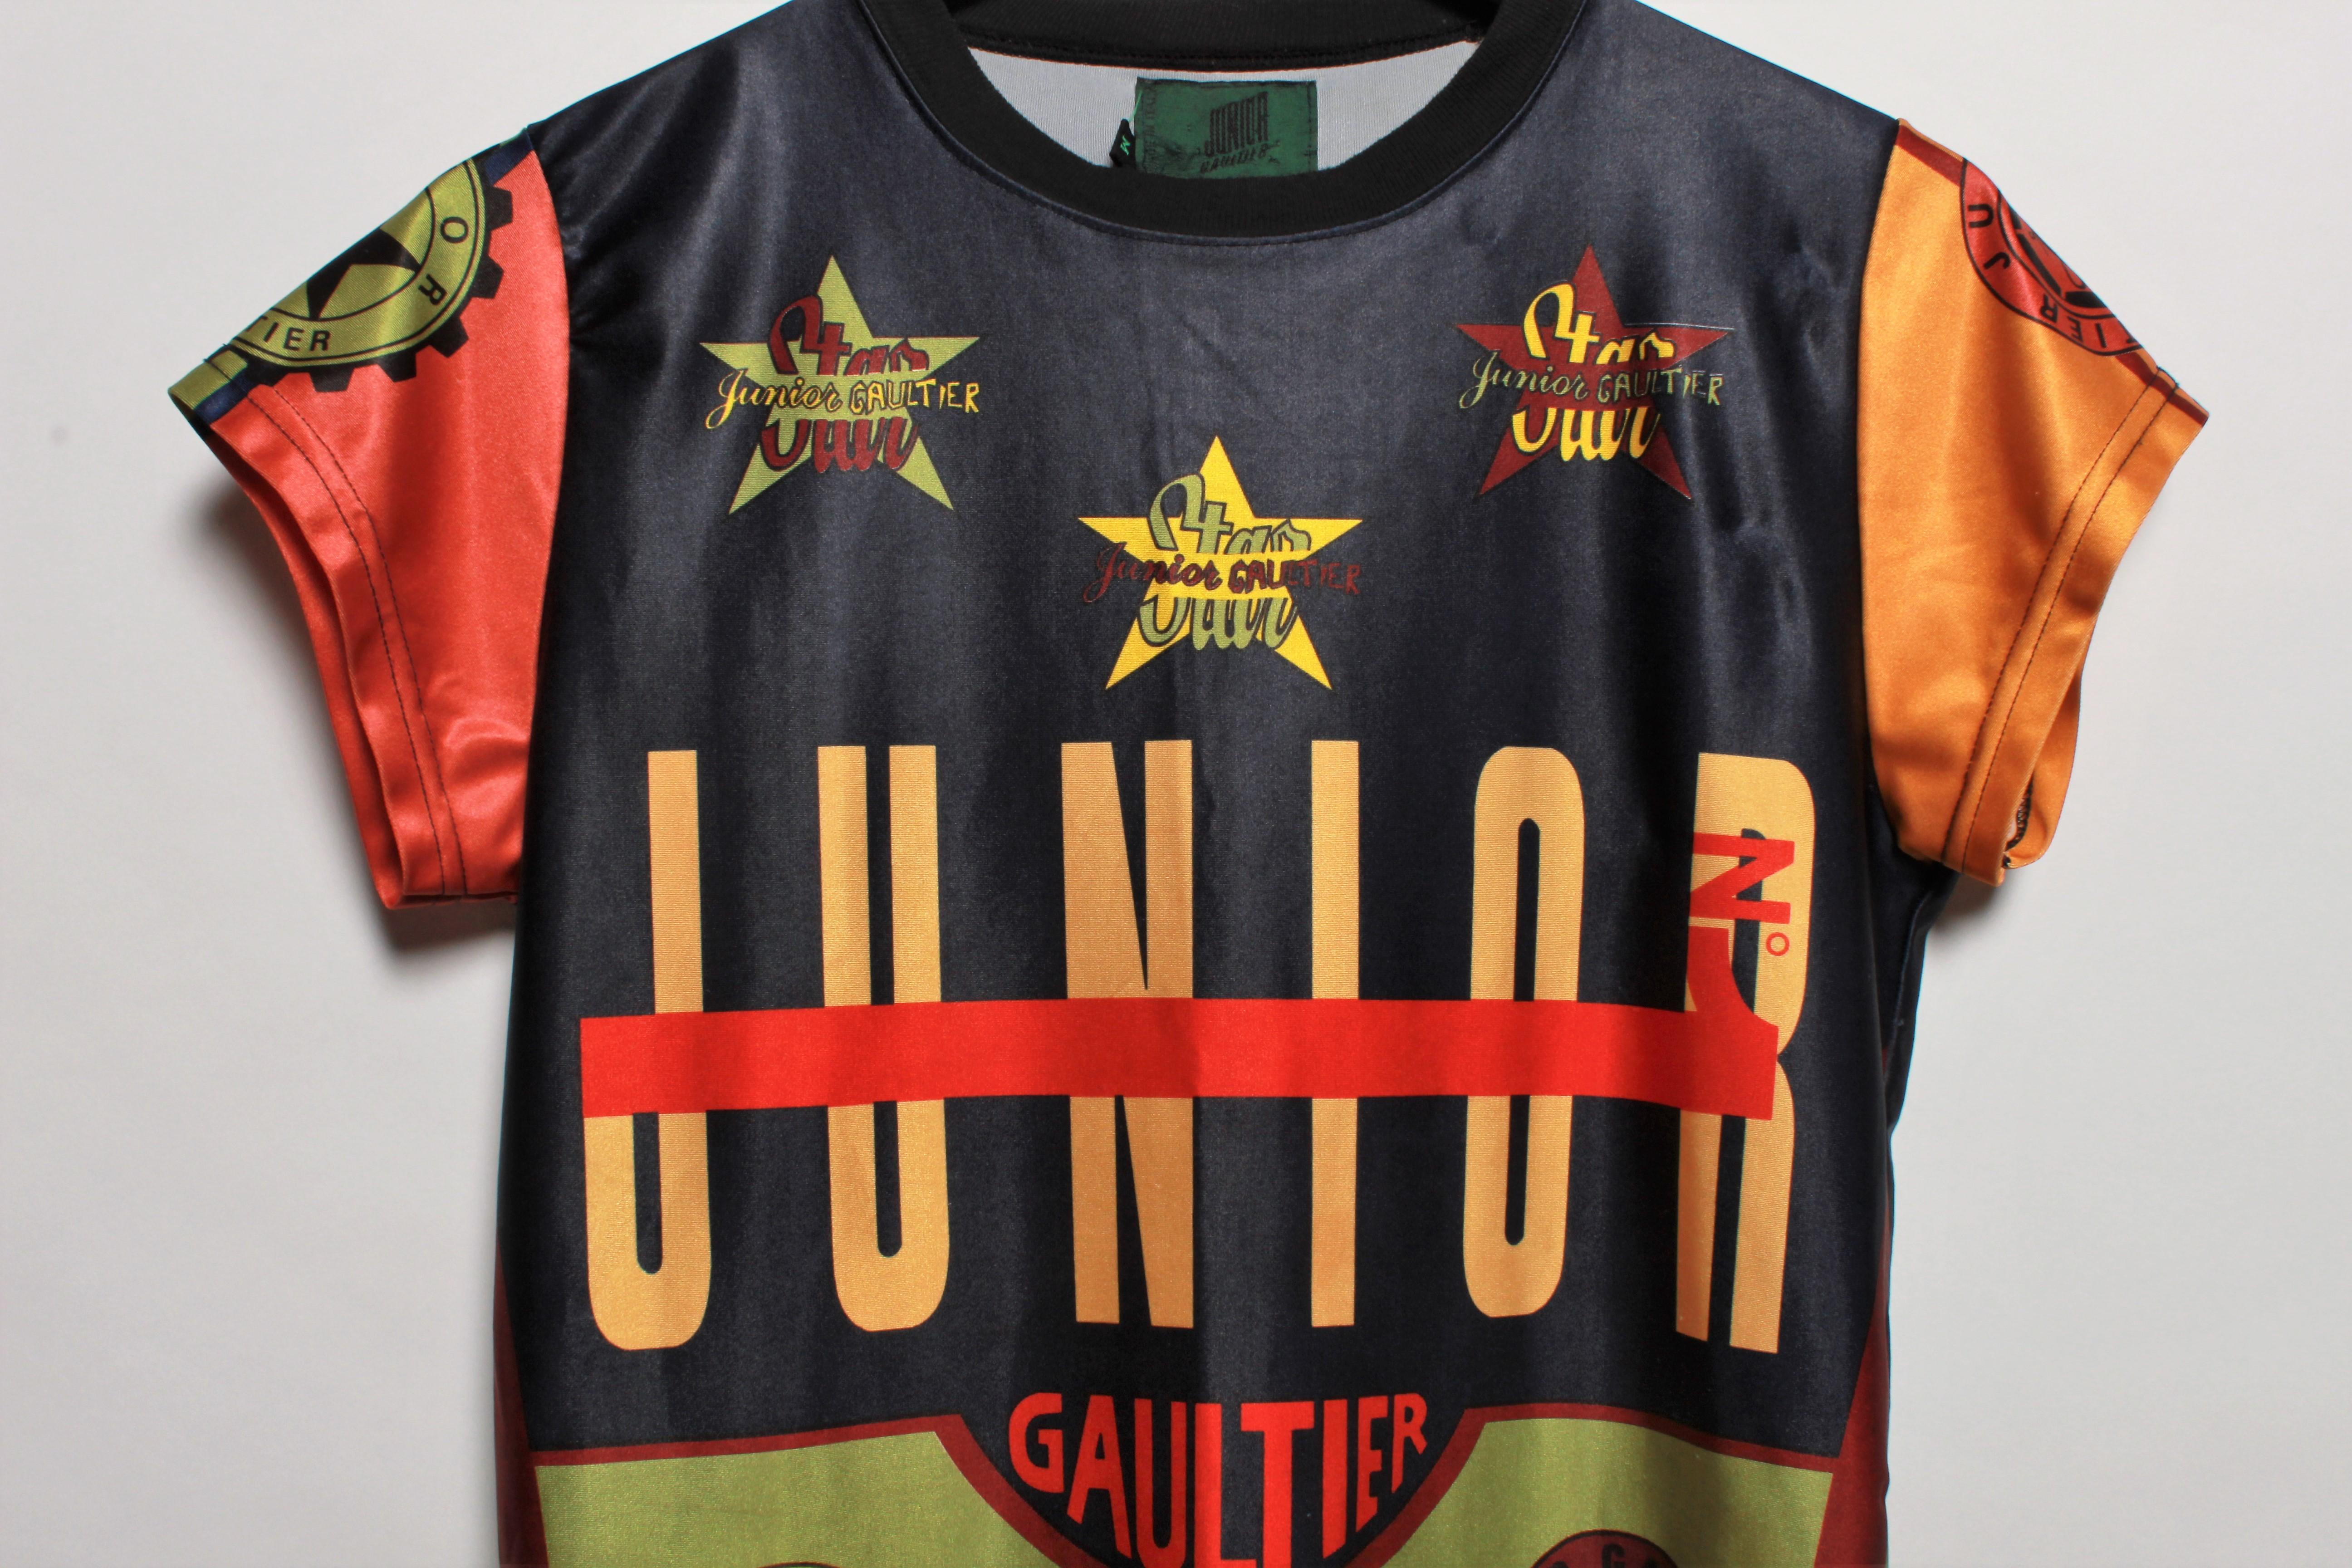 JEAN PAUL GAULTIER vintage iconic multicolored T-shirt.

This T-shirt features multicolored graphic blocks with iconic JPG print.
 Ribbed textured round neck, short sleeves, stretch shiny jersey.

Label reads JUNIOR GAULTIER.
Made in Italy.

Size